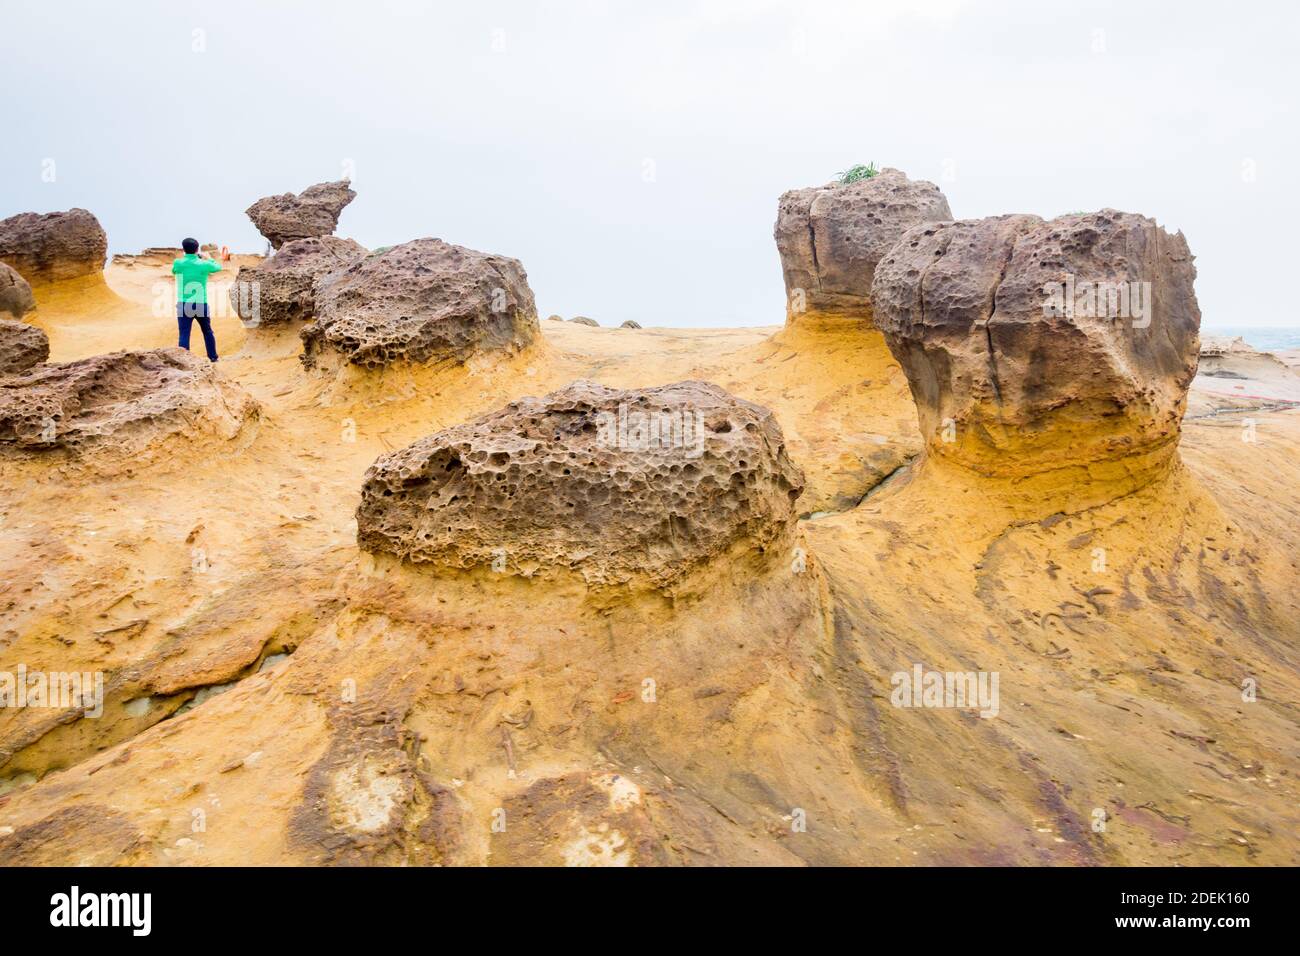 The scenic Yehliu Geopark in Wanli Disrict in New Taipei City, Taiwan has very interesting rock formations Stock Photo